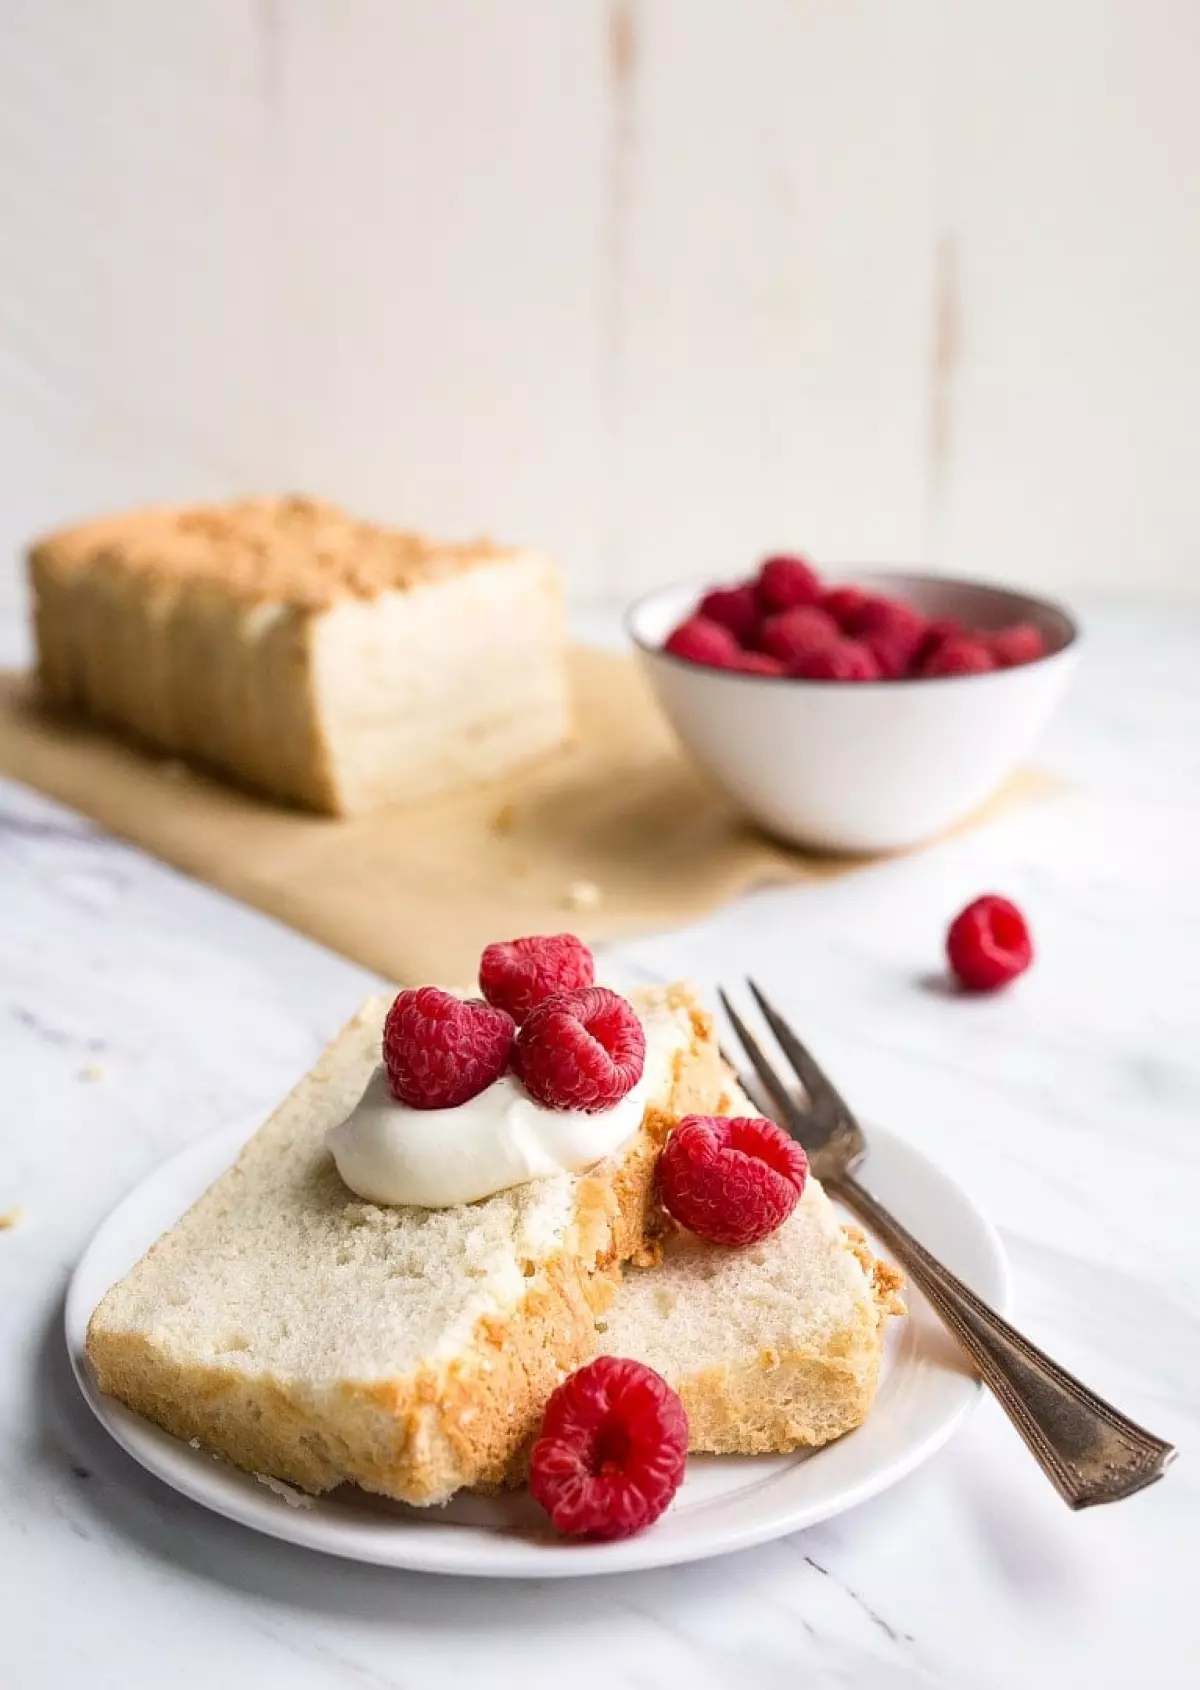 Mini Angel Food Cake in a Loaf Pan. Small angel food cake for one or two people made in a bread loaf pan that makes 8 slices.